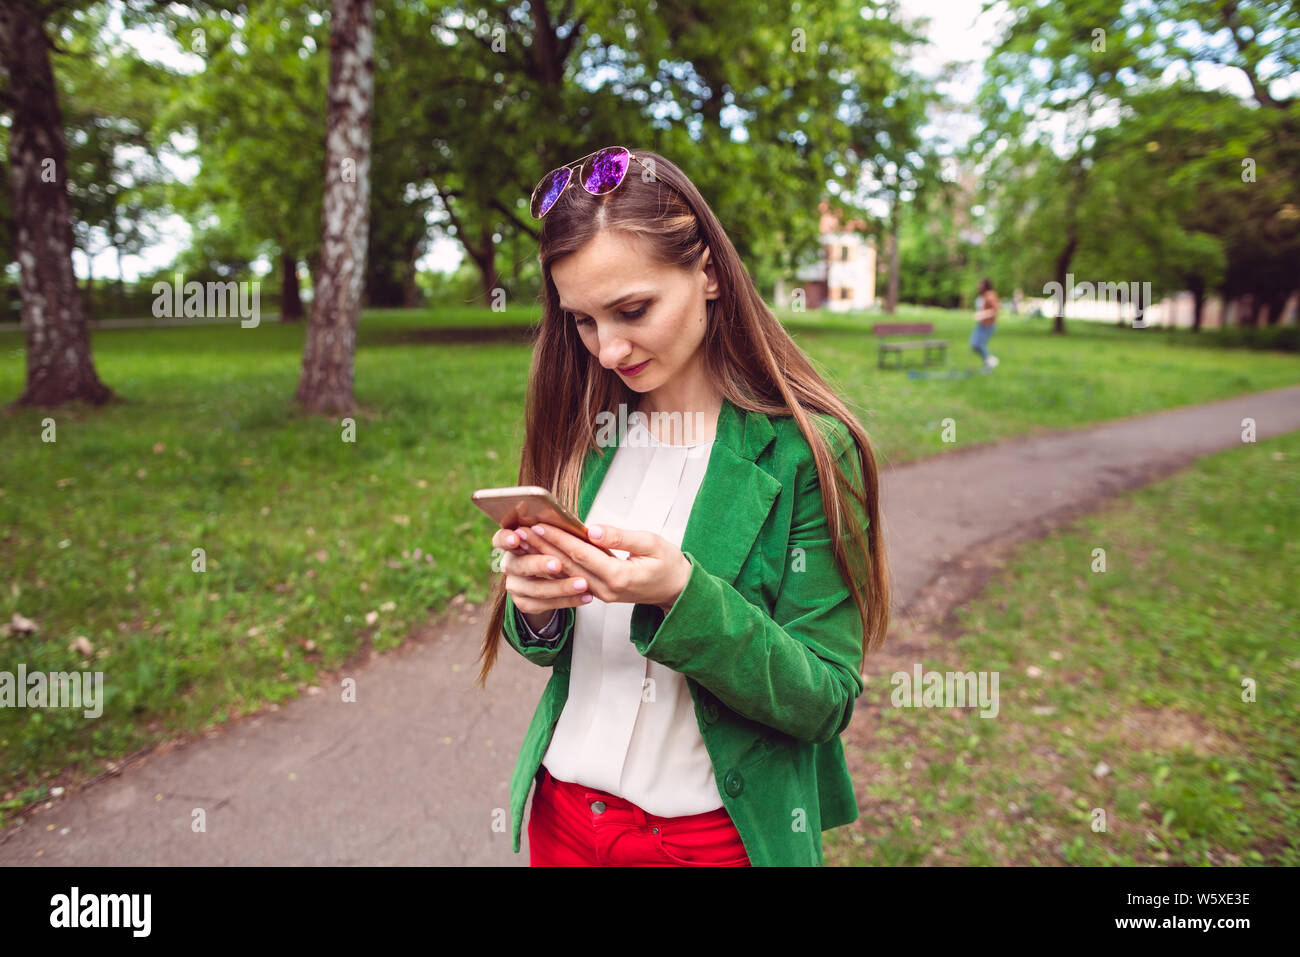 Young woman receiving a disturbing message on her phone Stock Photo